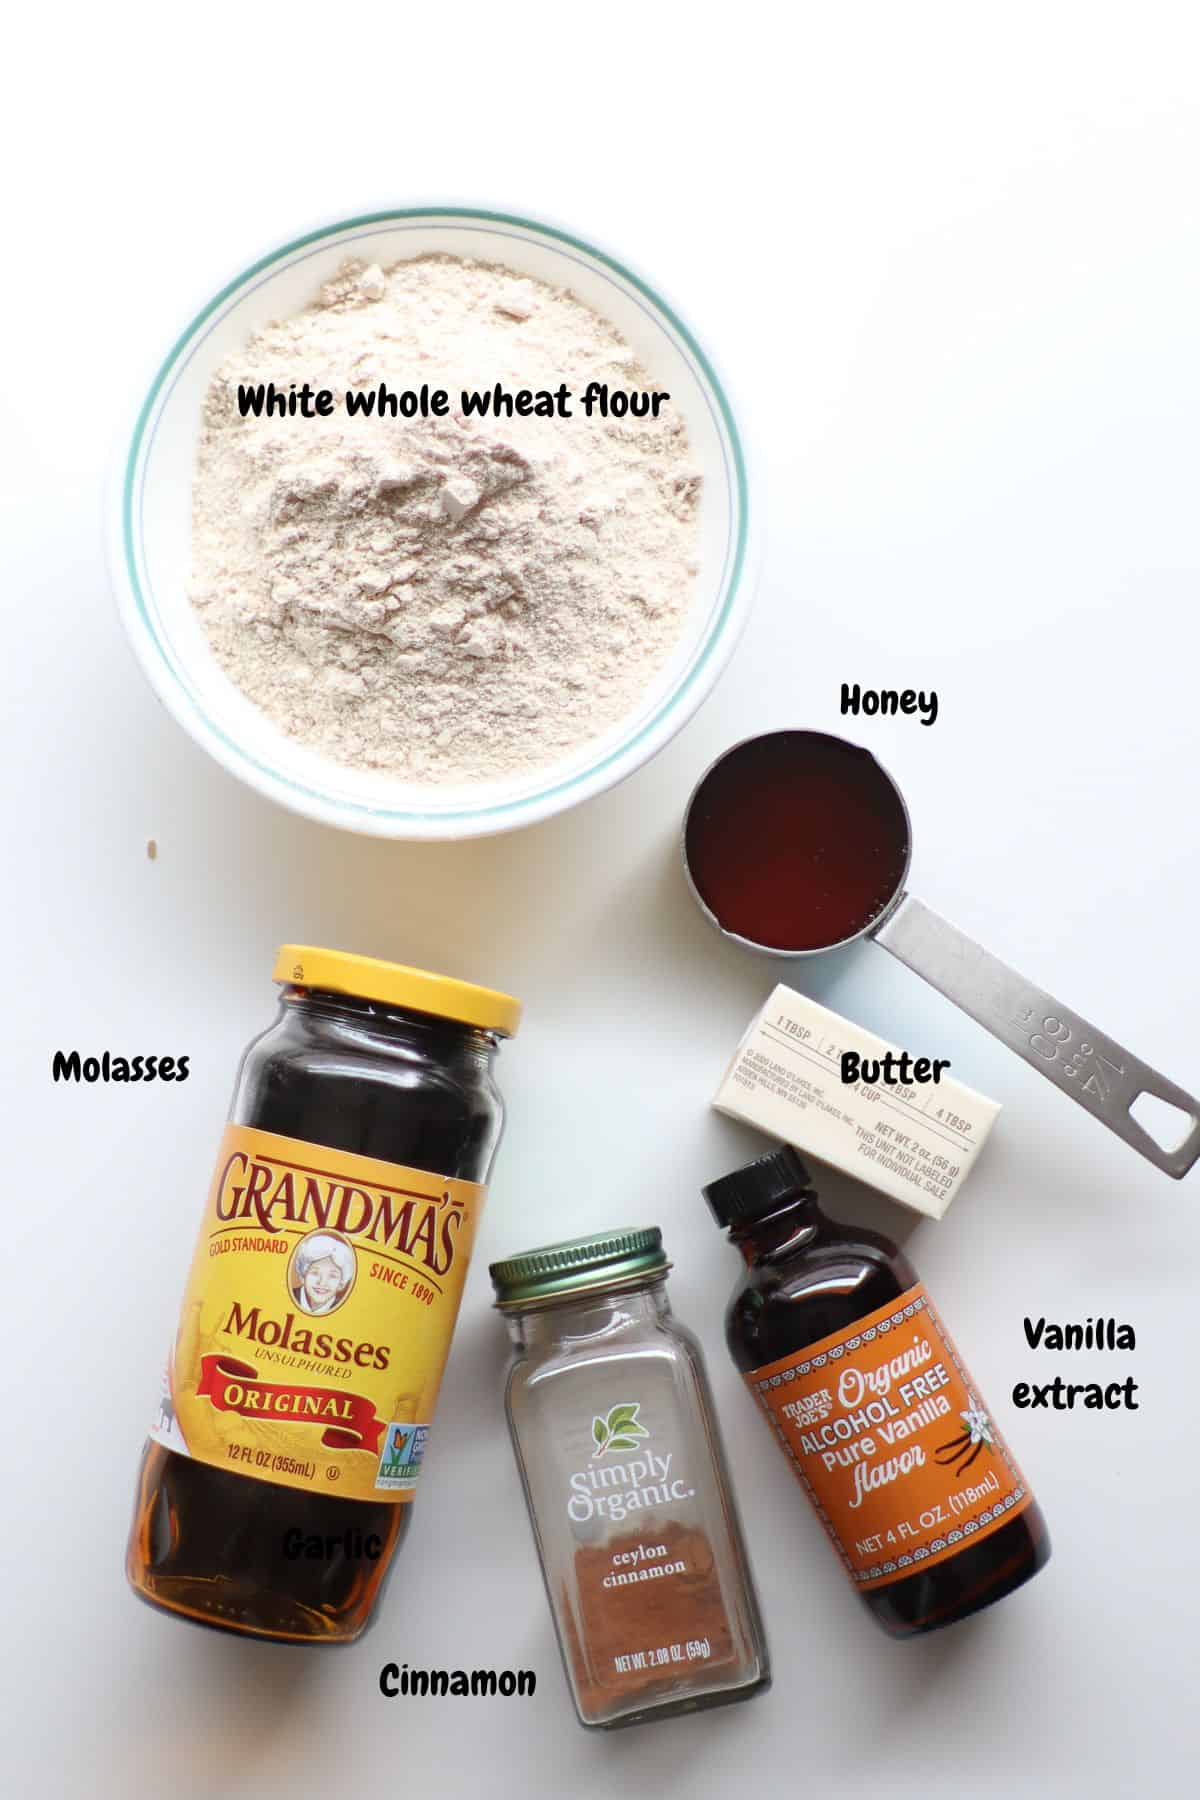 Ingredients laid out on a white countertop.